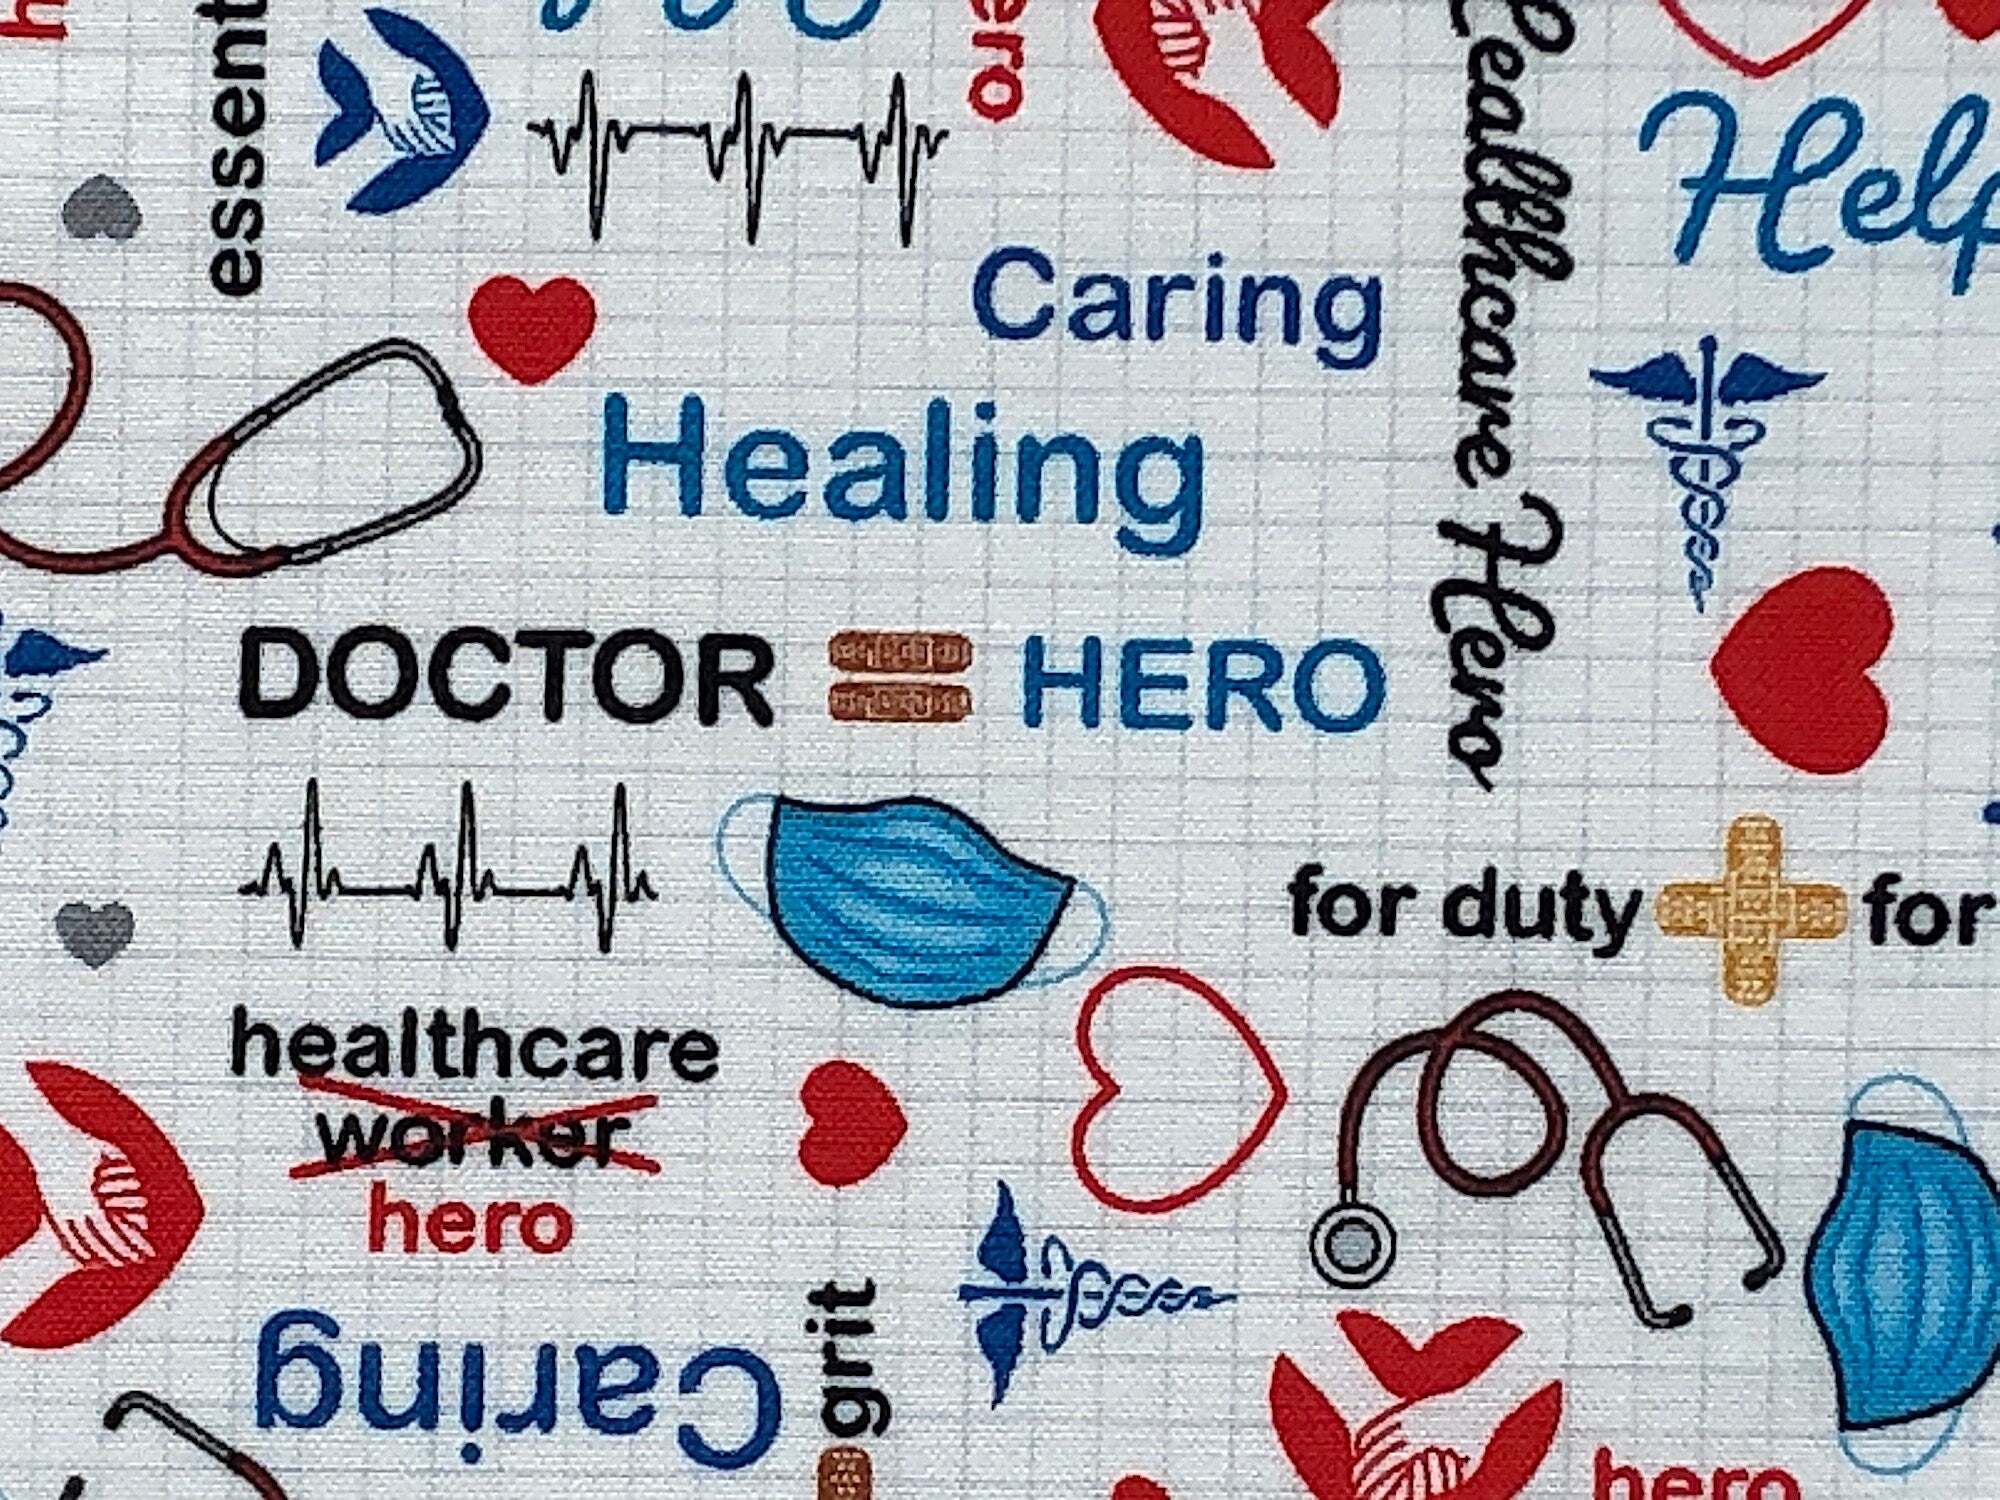 Close up of caring, healing, doctor, hero, healthcare hero and more.